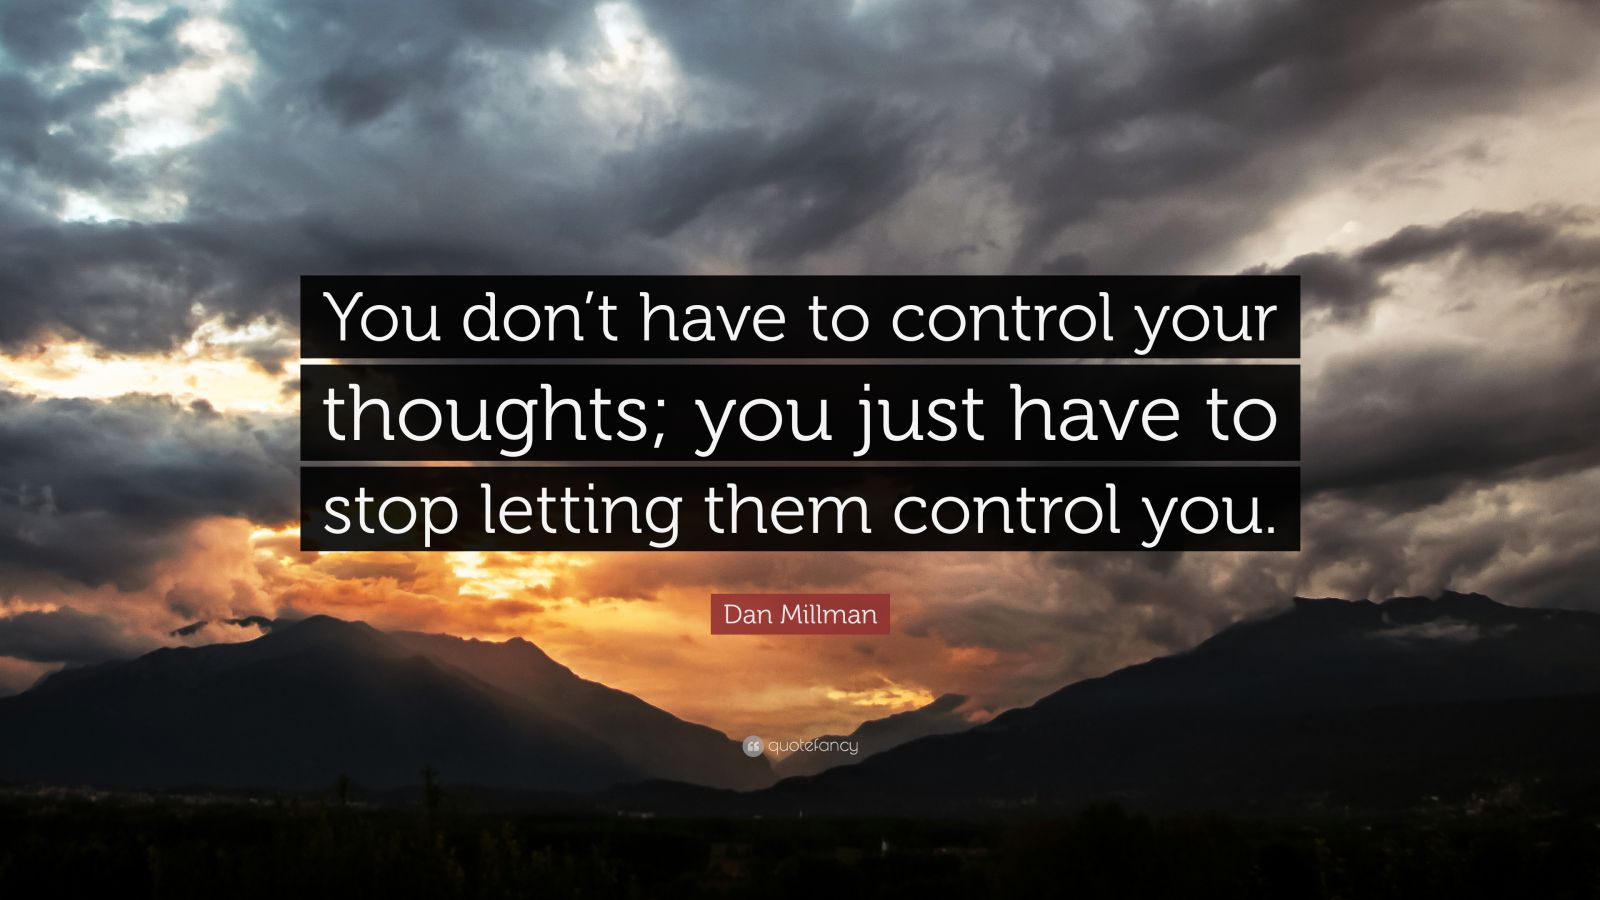 i never had thoughts that control me